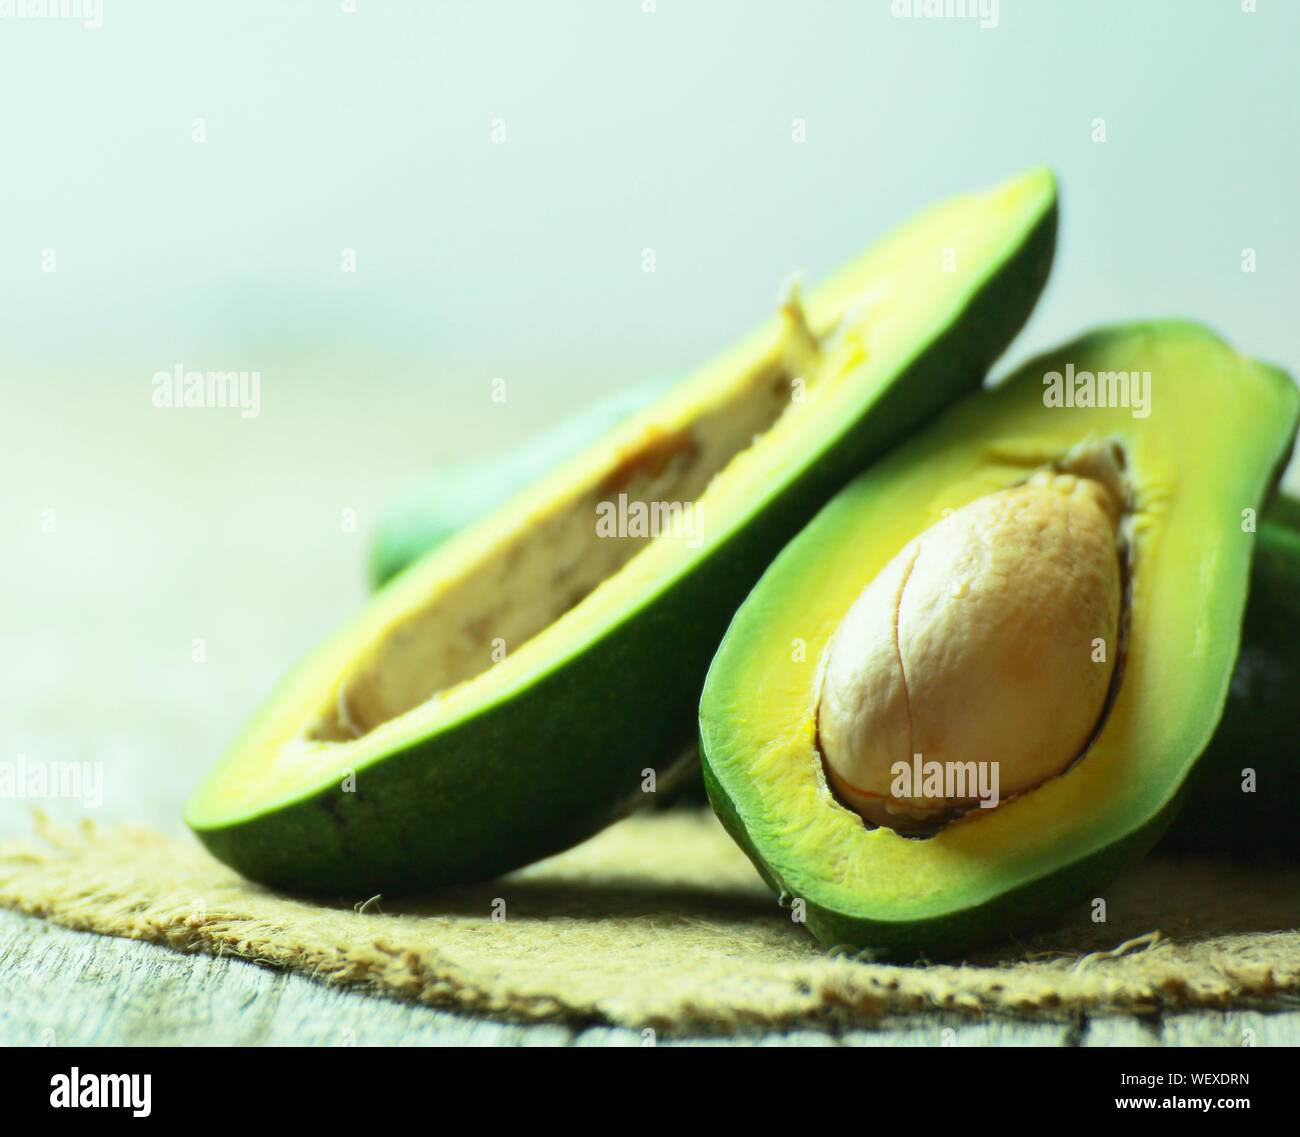 Close-up Of Halved Avocados On Table Stock Photo